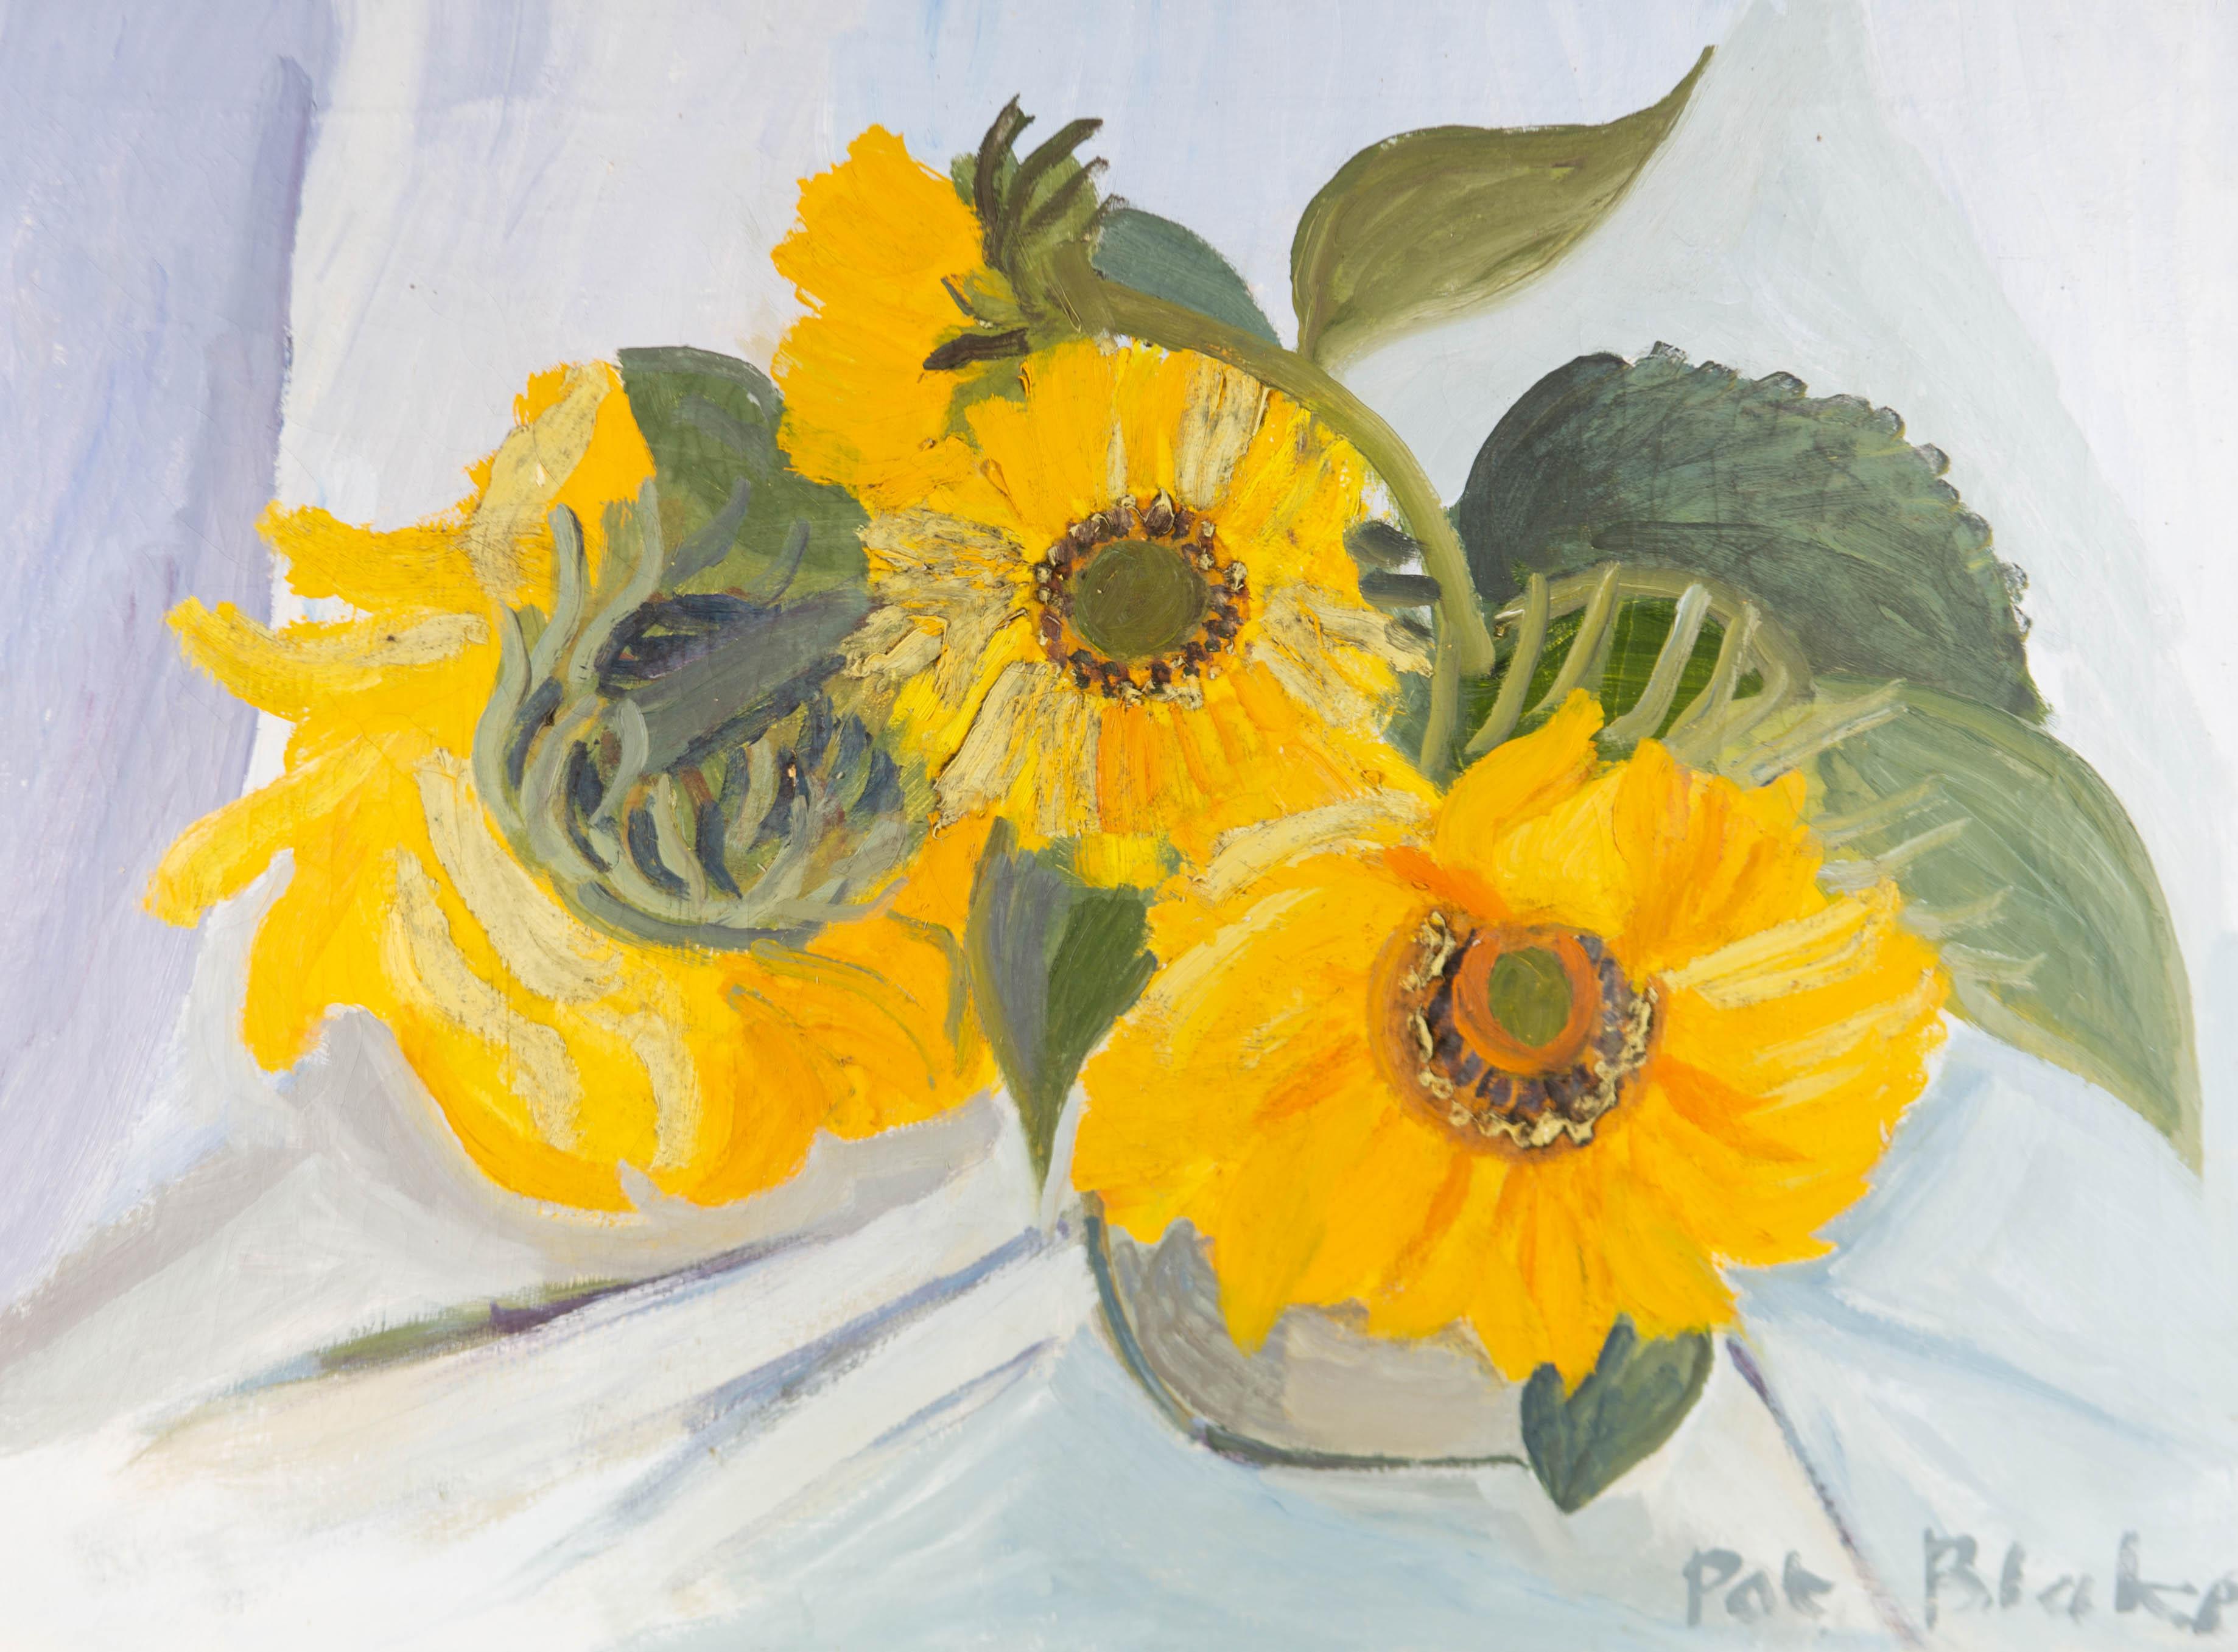 A bright oil painting with areas of impasto by Pat Blake, depicting a still life composition of three sunflowers in a vase. On canvas on stretchers.
